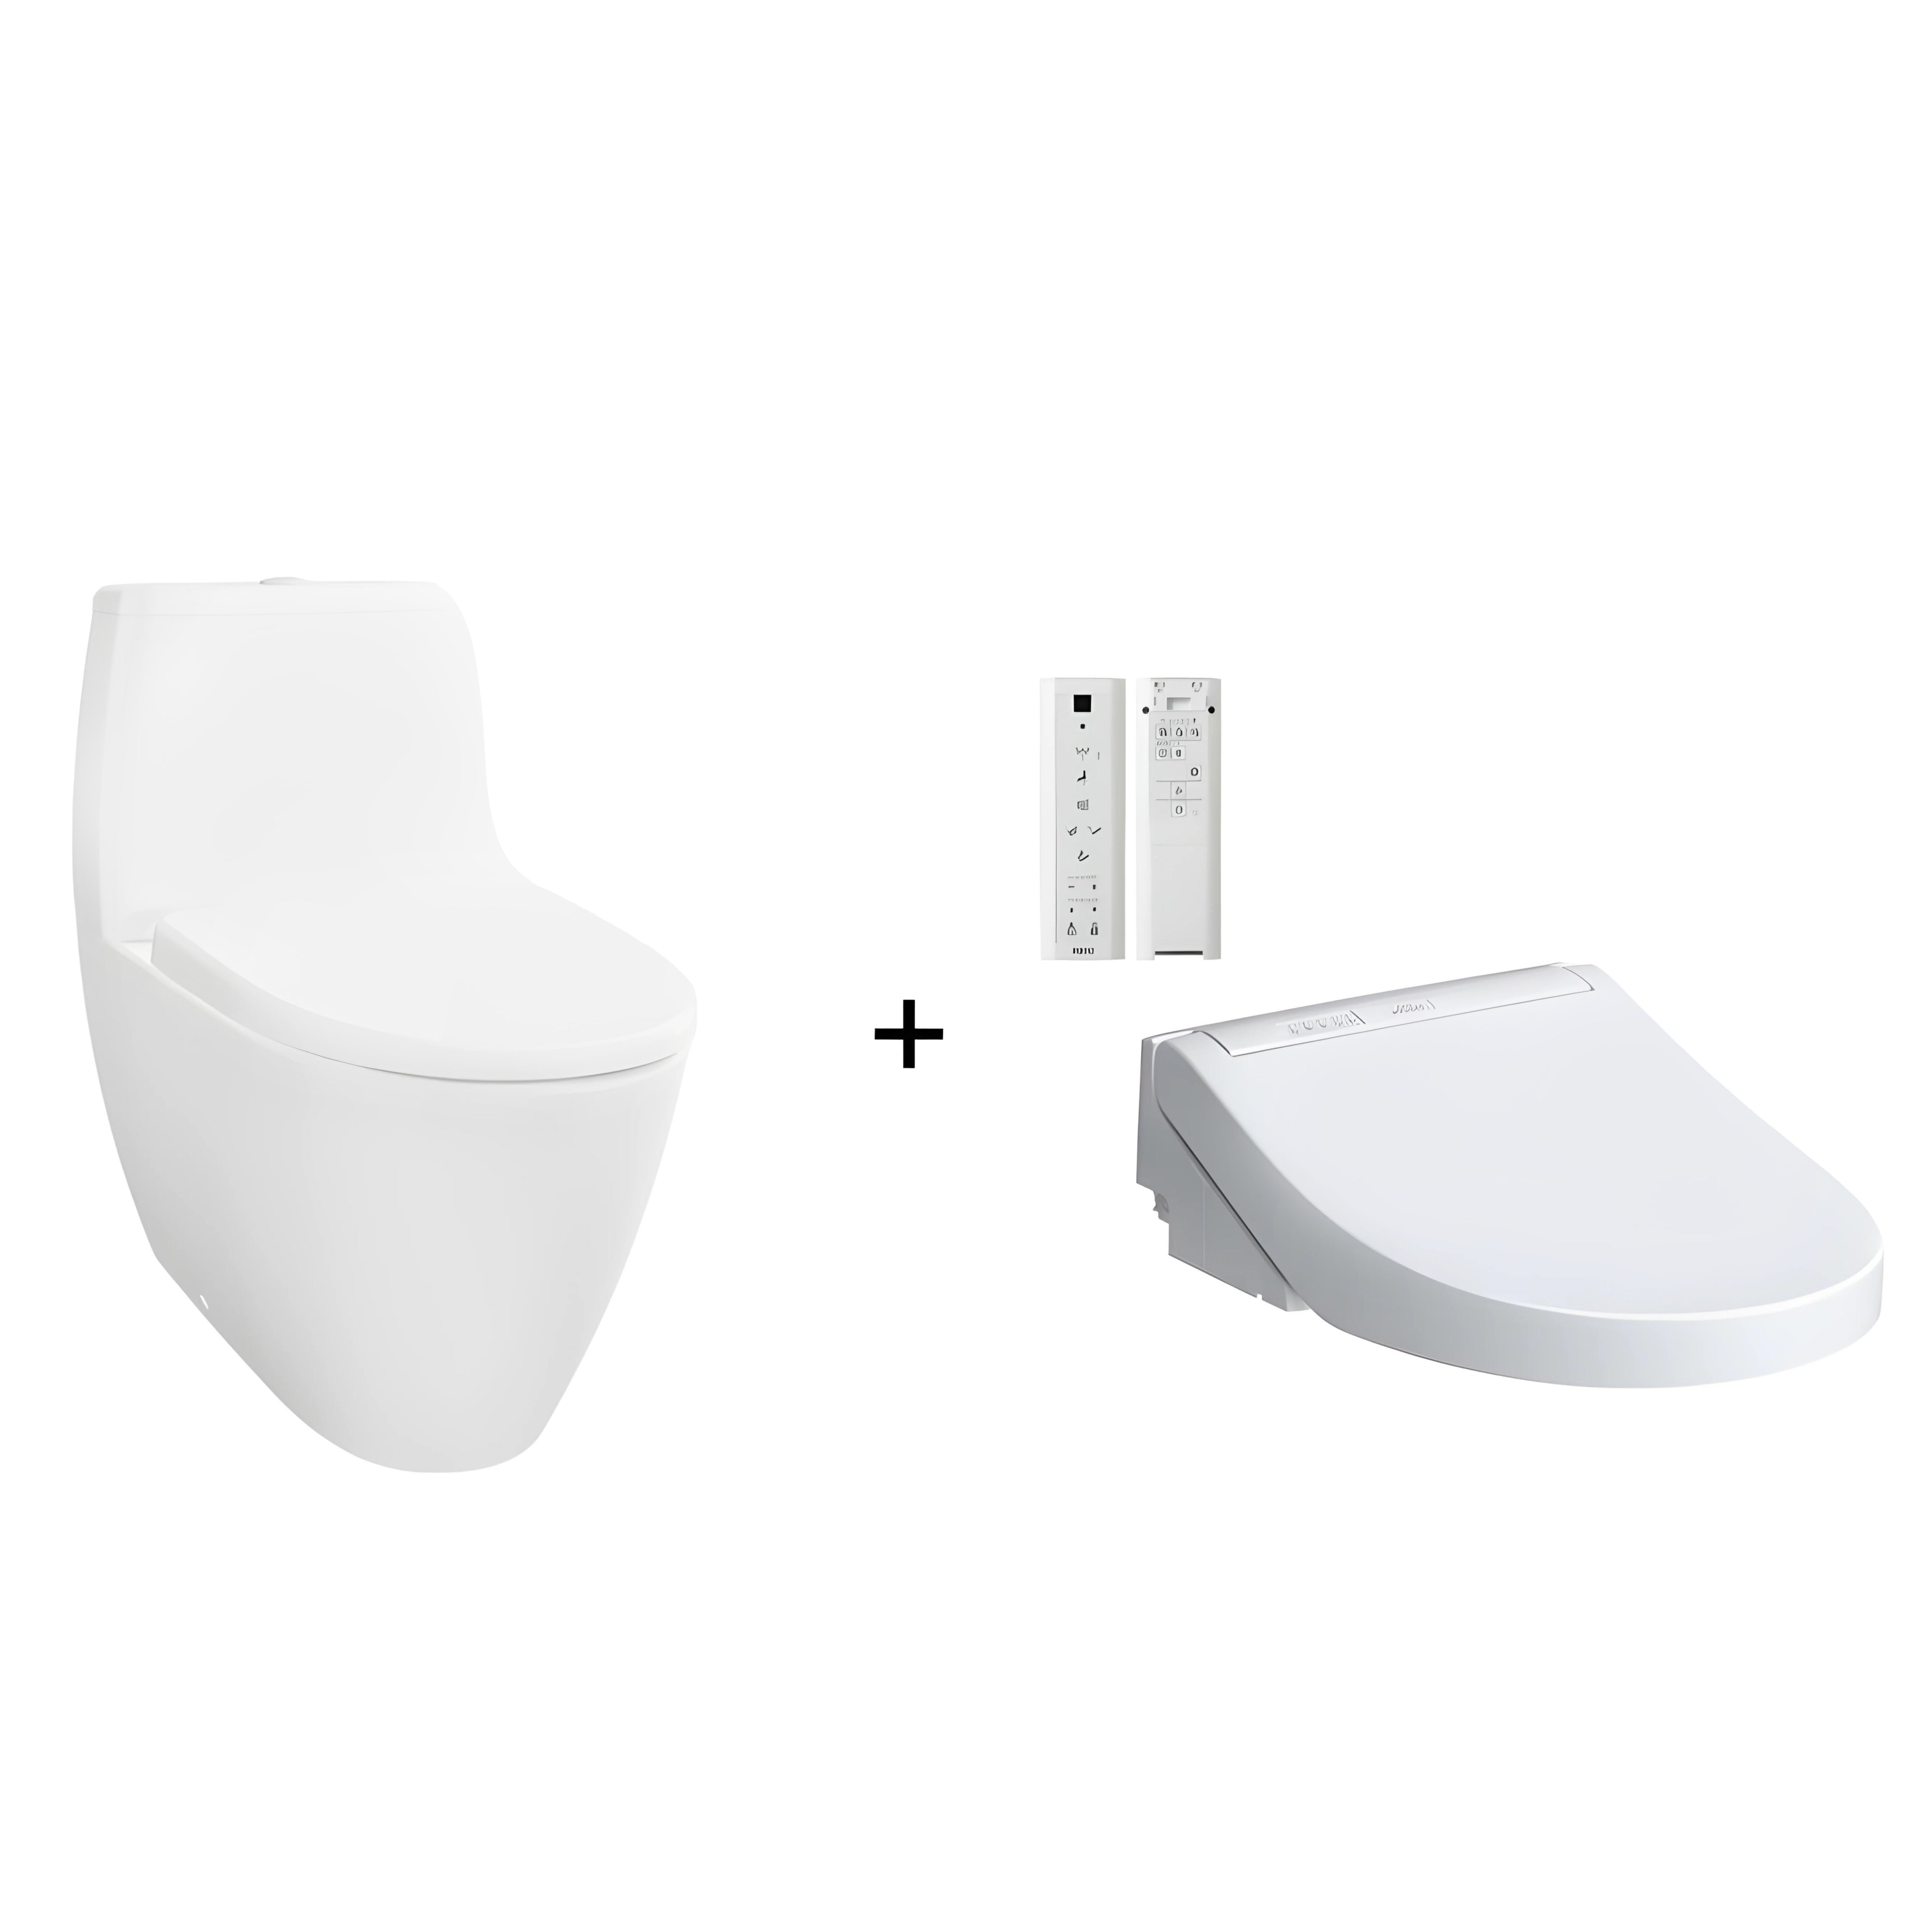 TOTO ROUND CLOSE COUPLED TOILET (ROUND CISTERN) AND C5 WASHLET W/ REMOTE CONTROL (ROUND) GLOSS WHITE